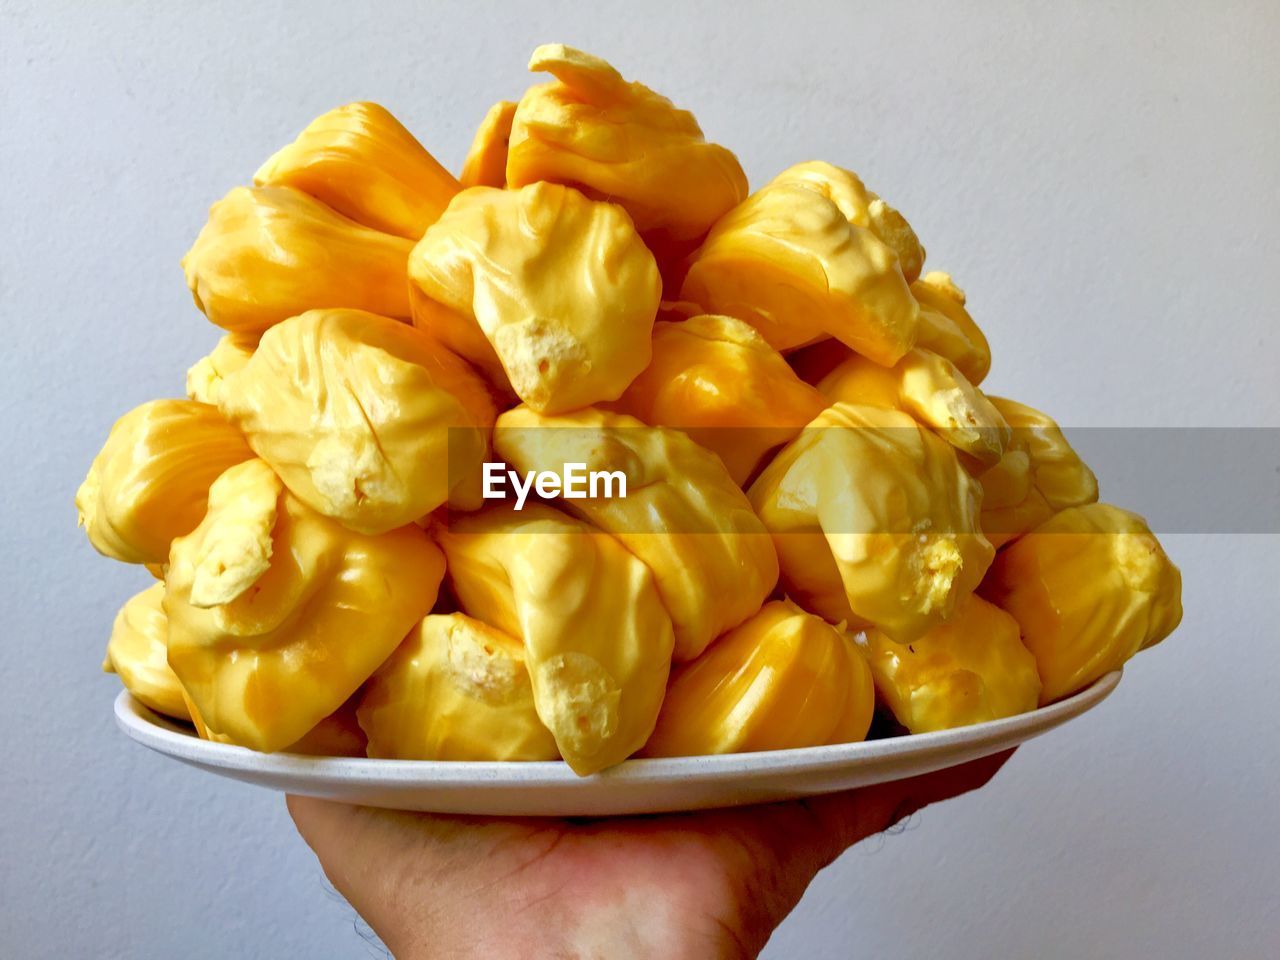 CLOSE-UP OF HAND HOLDING BOWL OF YELLOW AND VEGETABLE